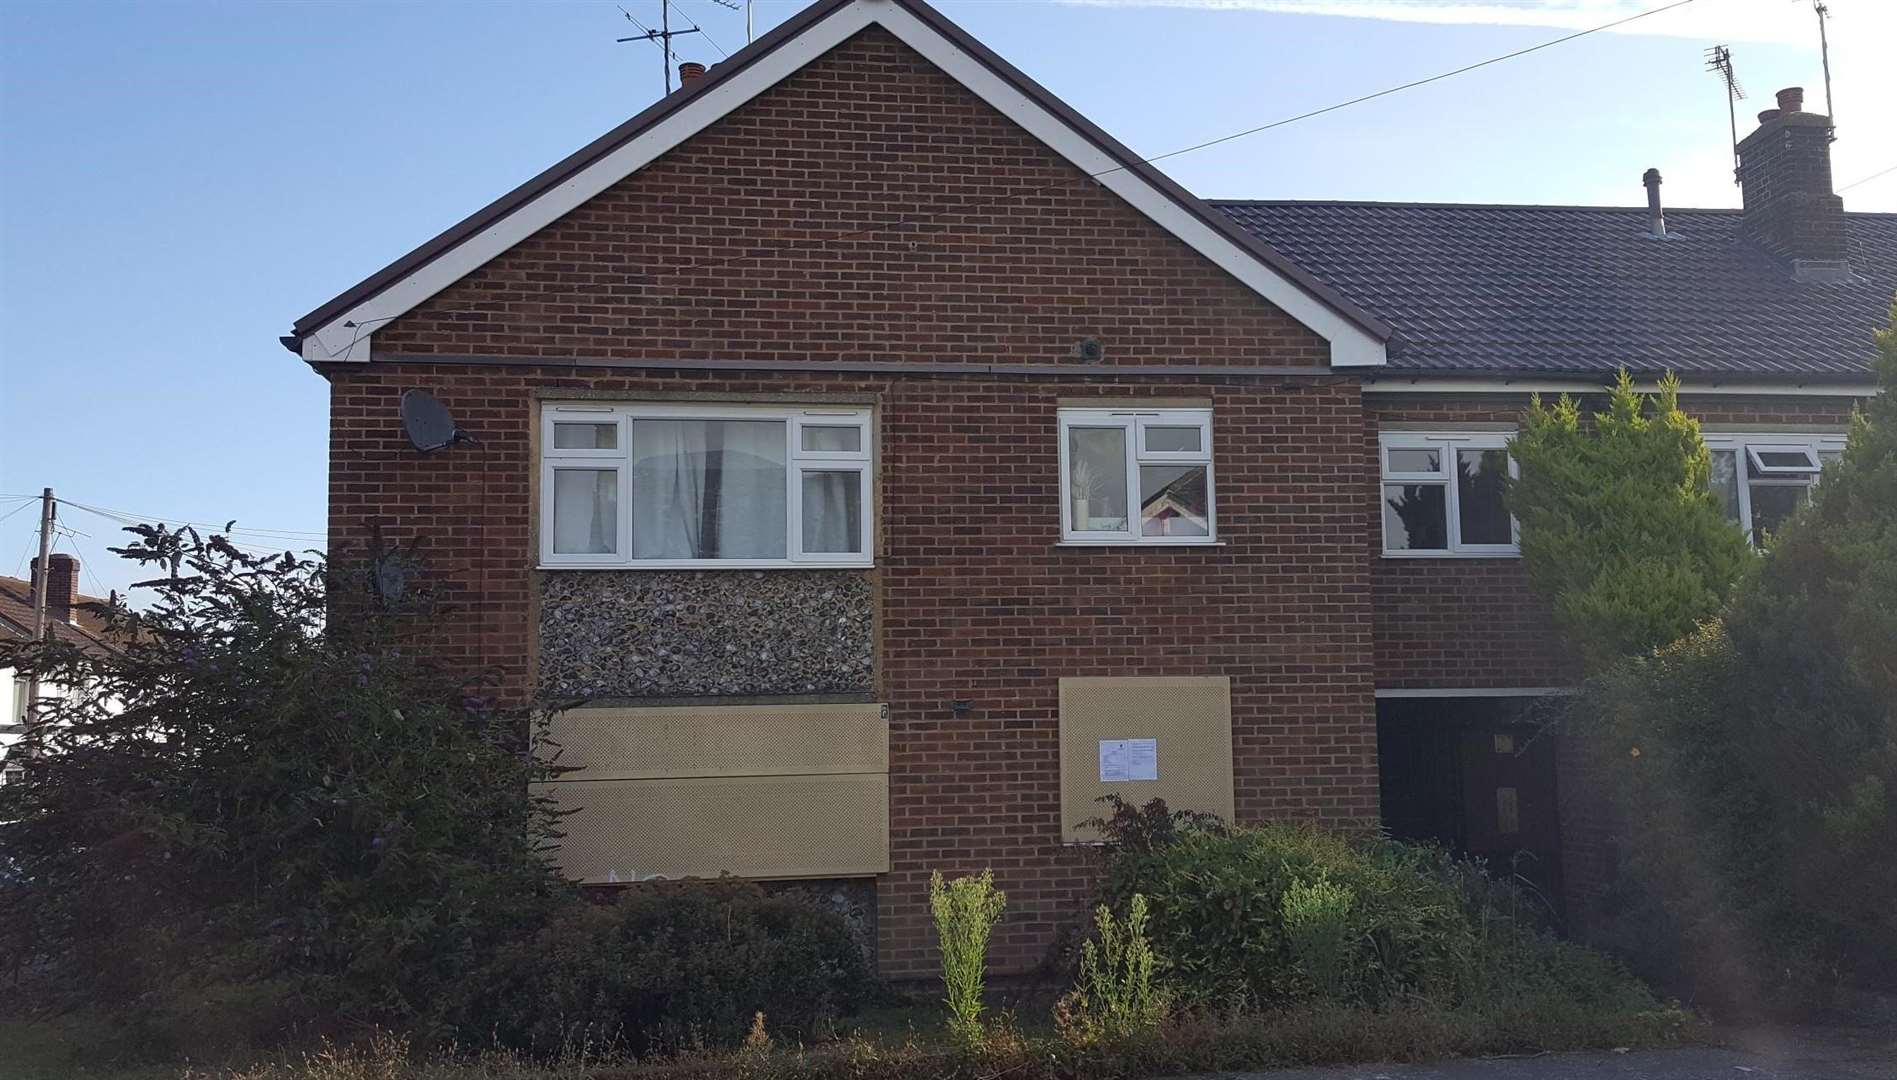 A property in Croft Road has been boarded-up. Picture: Ashford Borough Council